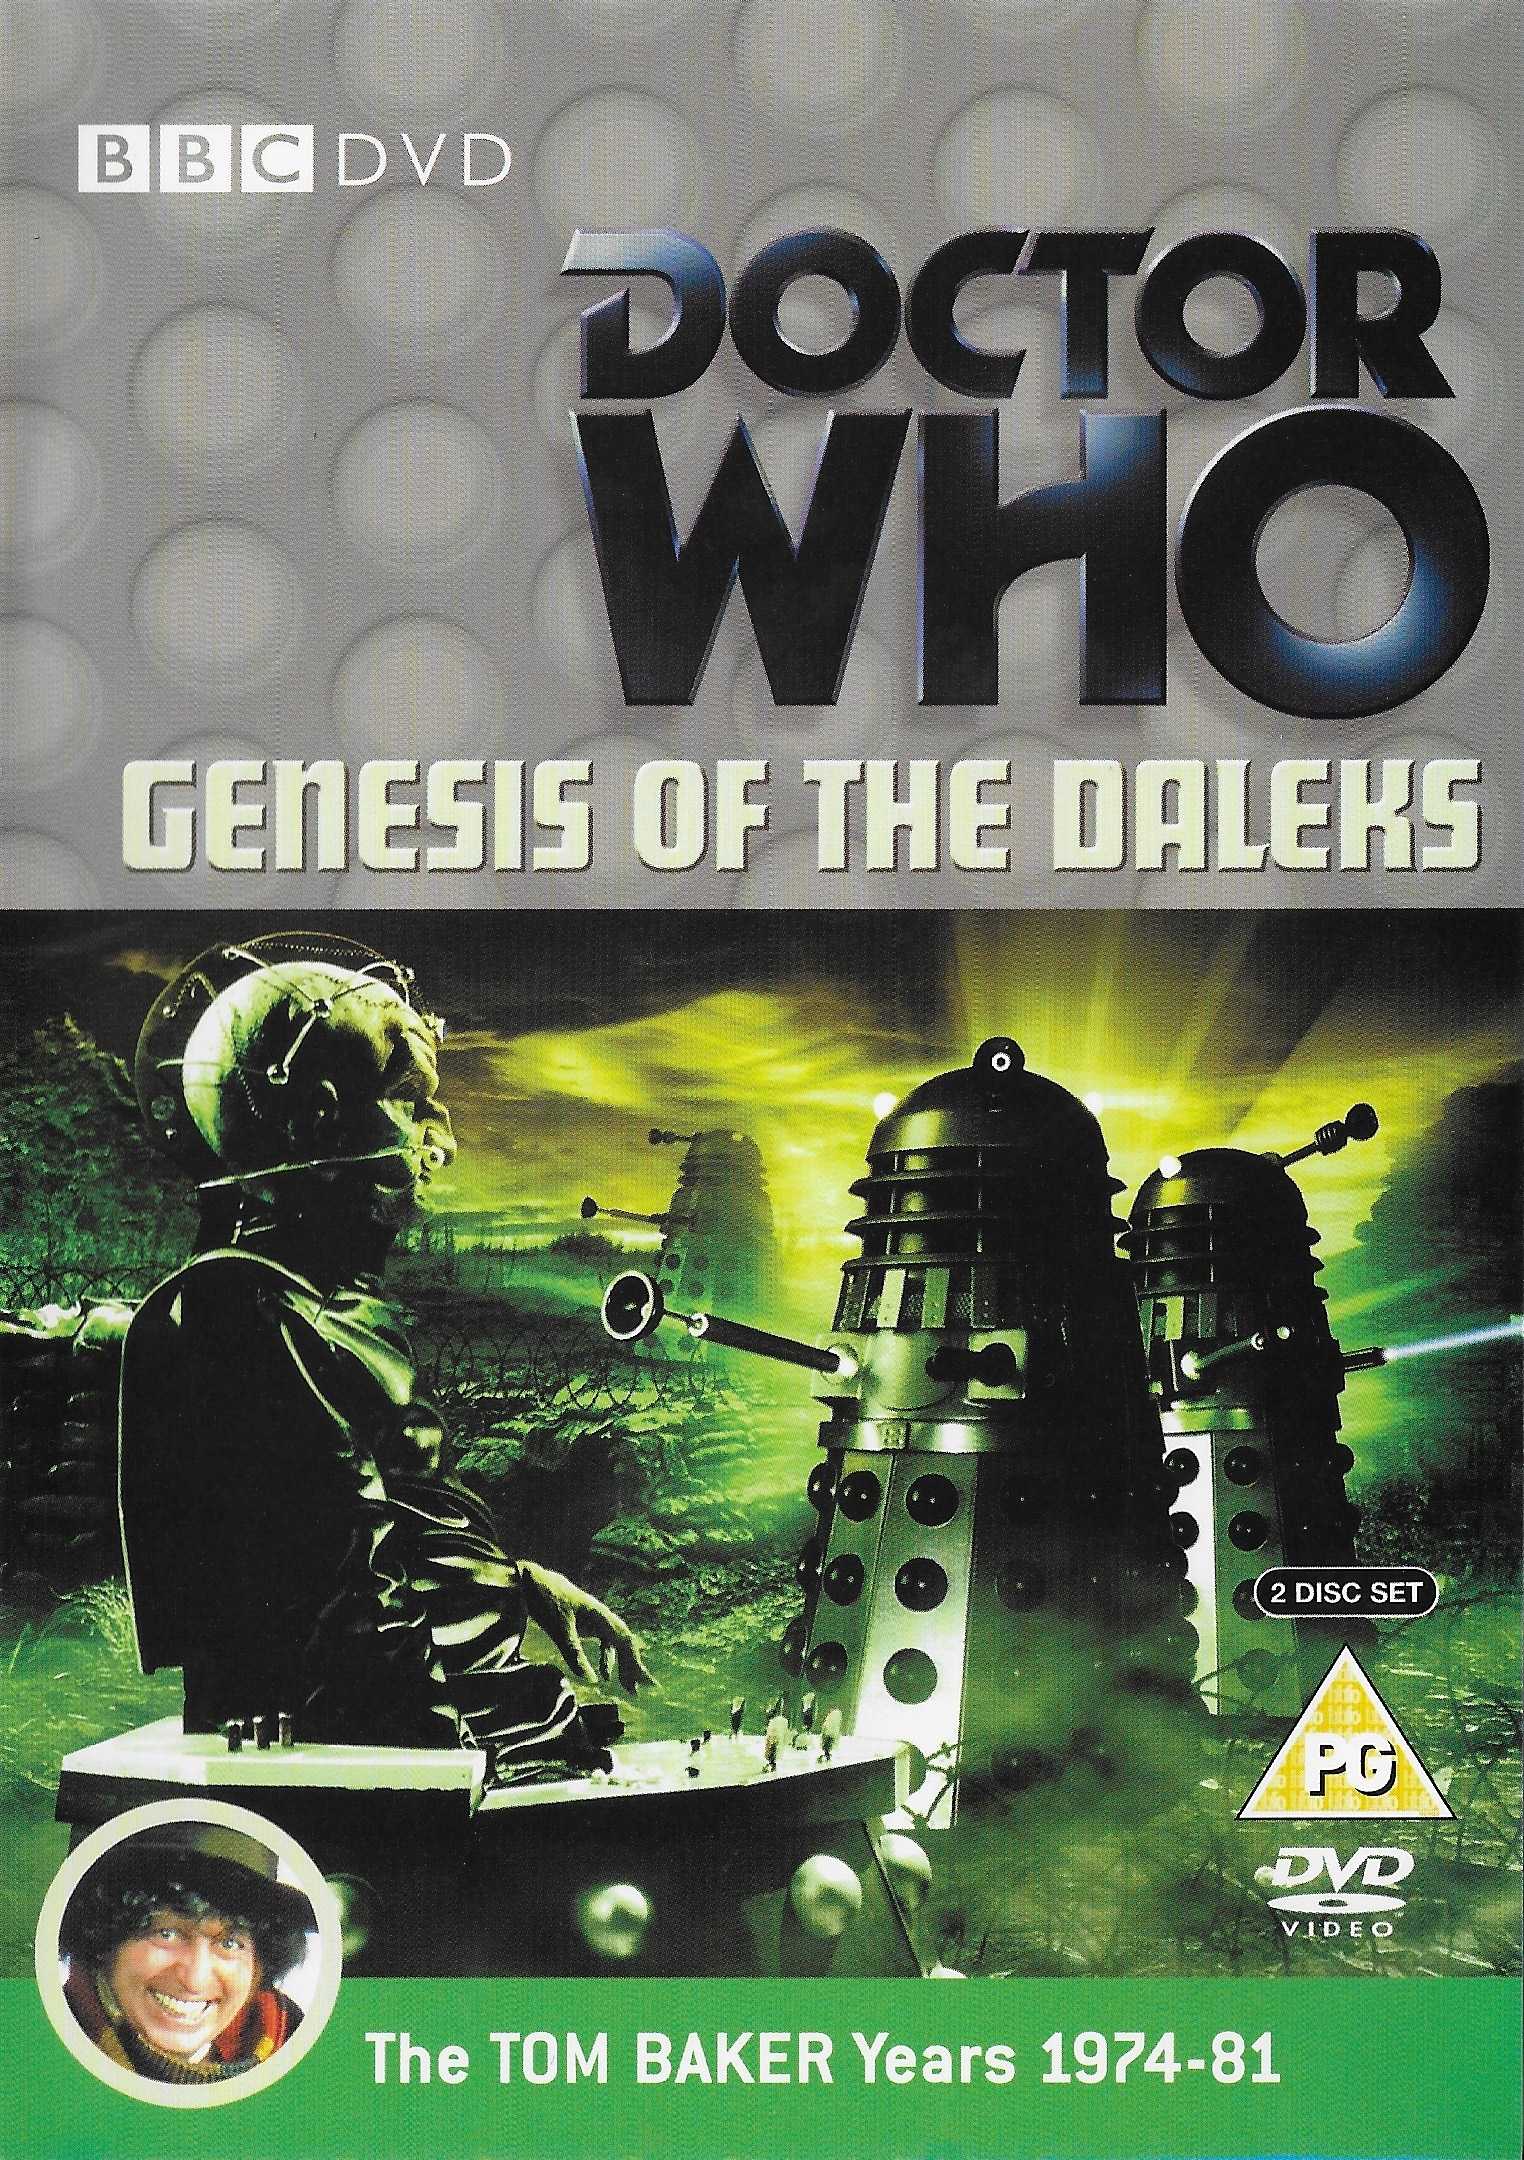 Picture of BBCDVD 1813 Doctor Who - Genesis of the Daleks by artist Terry Nation from the BBC dvds - Records and Tapes library